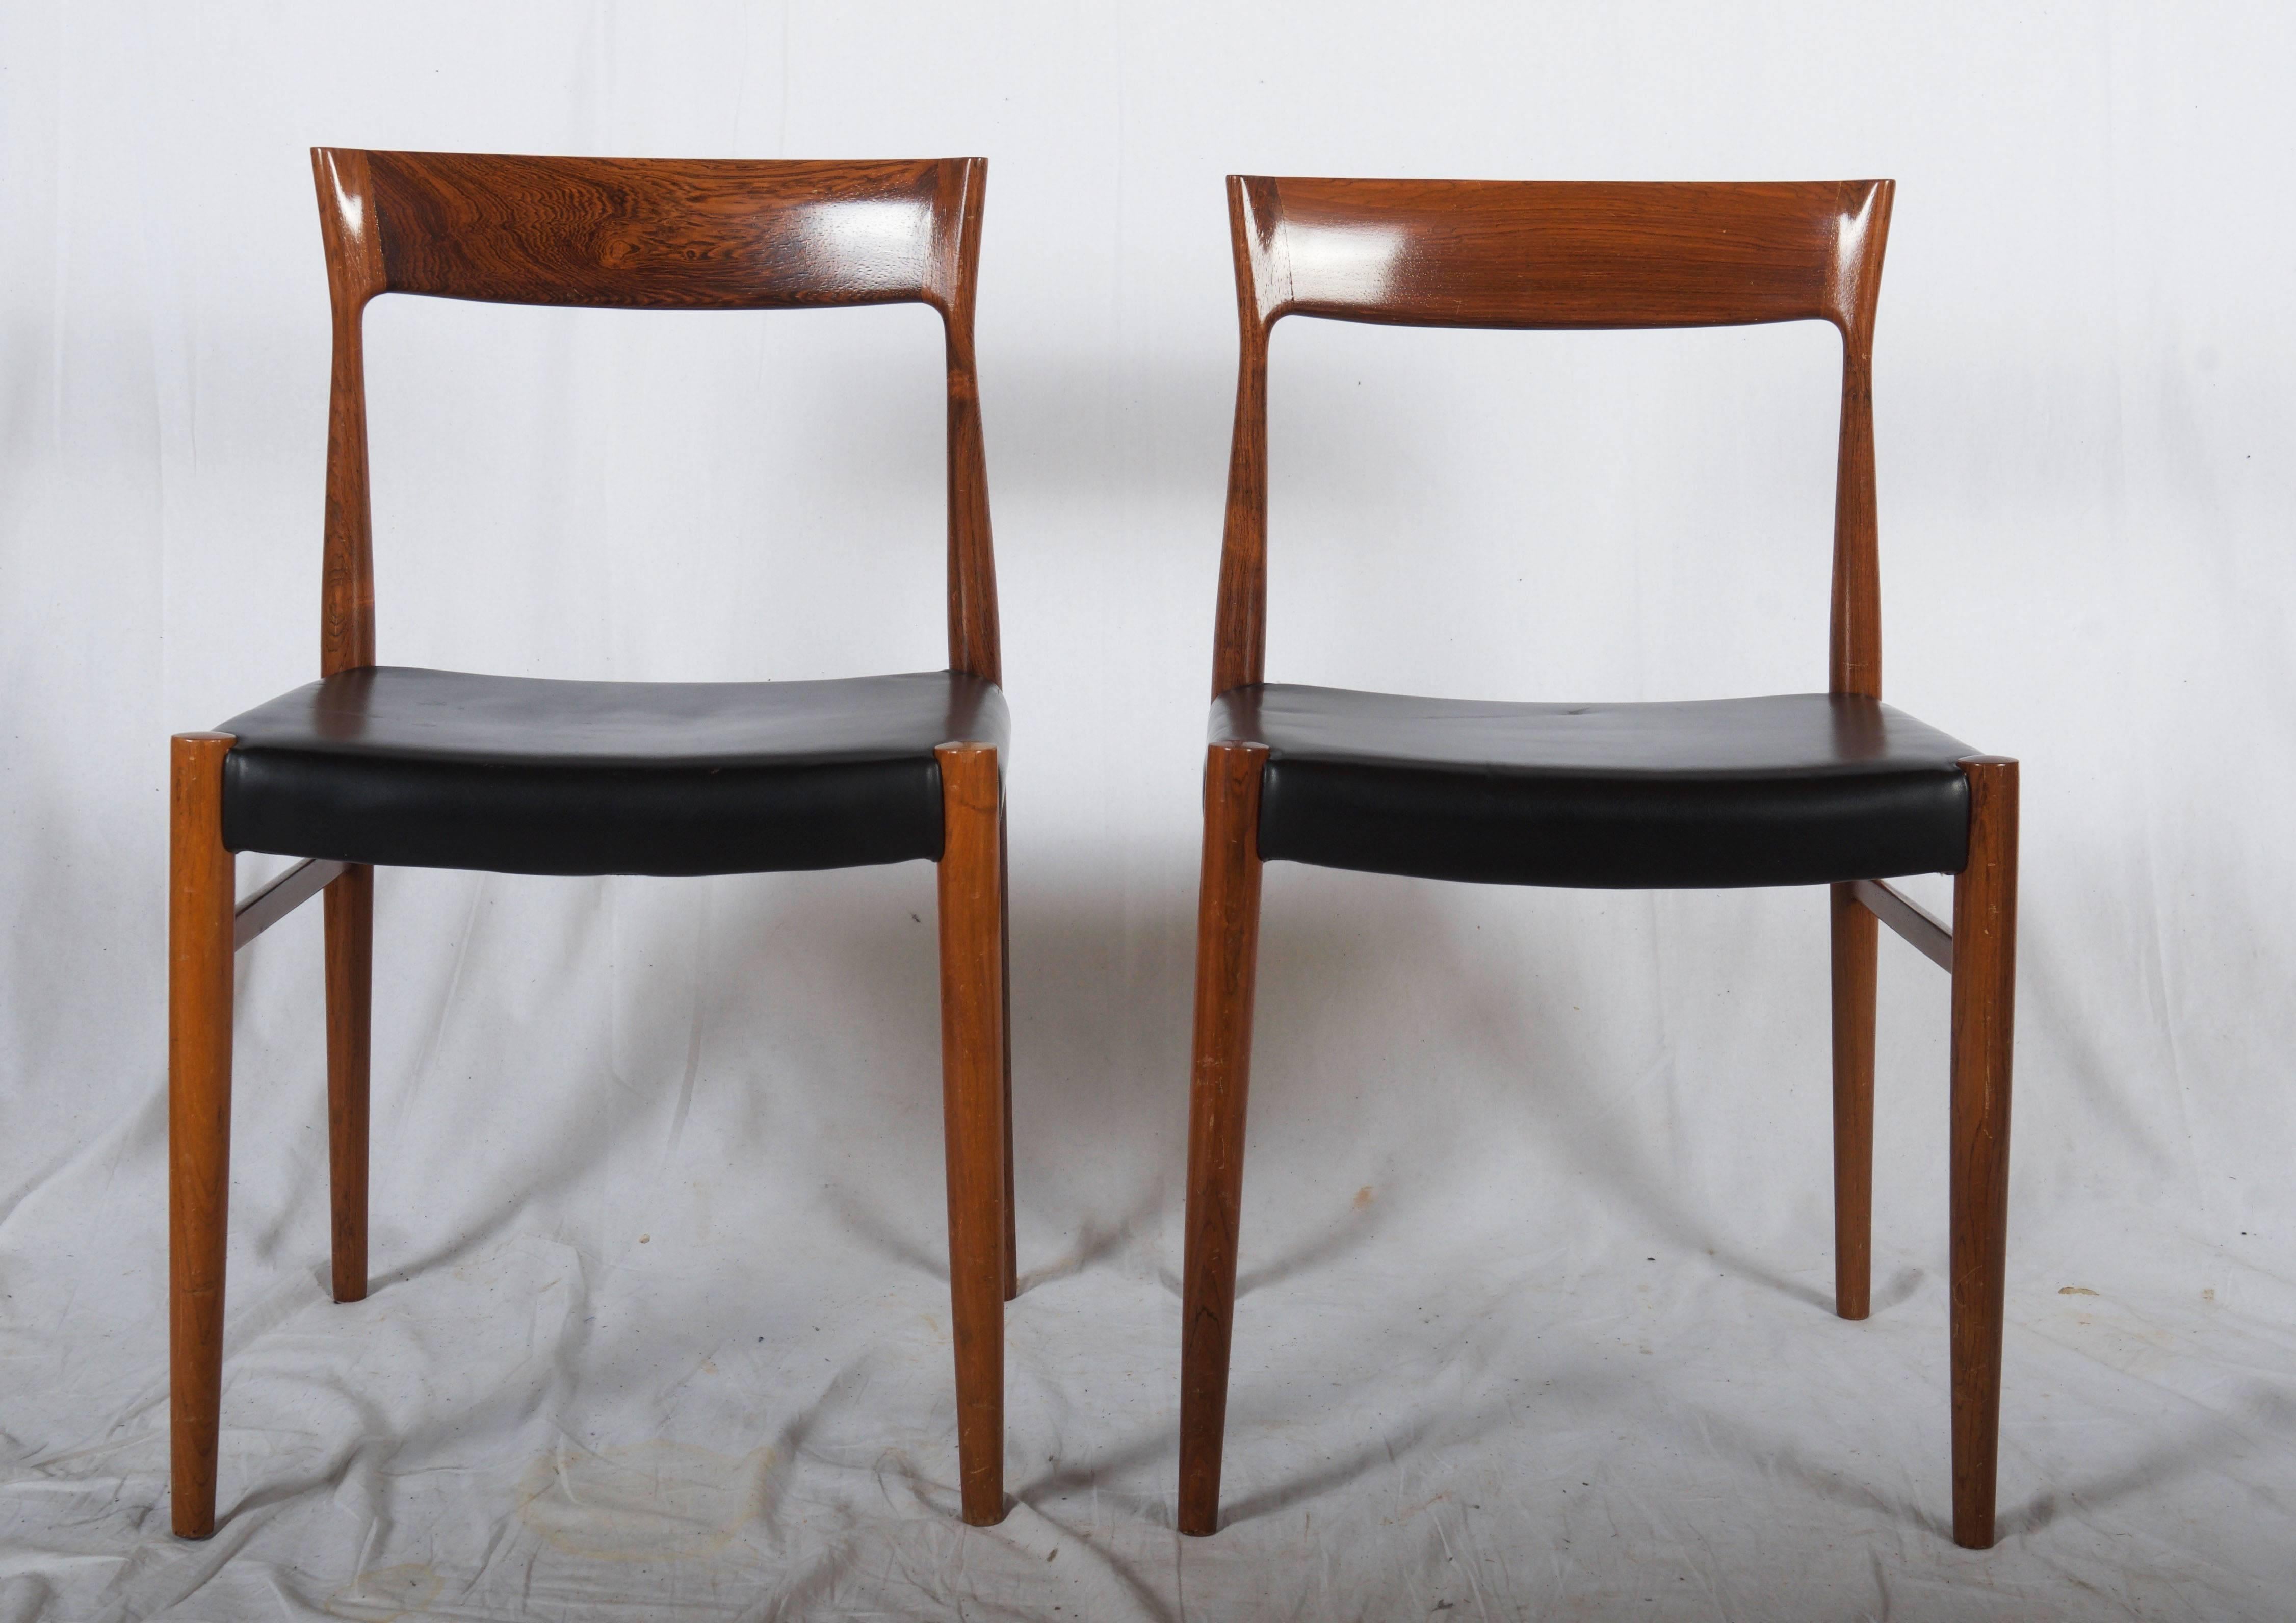 Scandinavian Modern Set of Six Hardwood Dining Chairs in the Style of Møller 77 Chairs For Sale